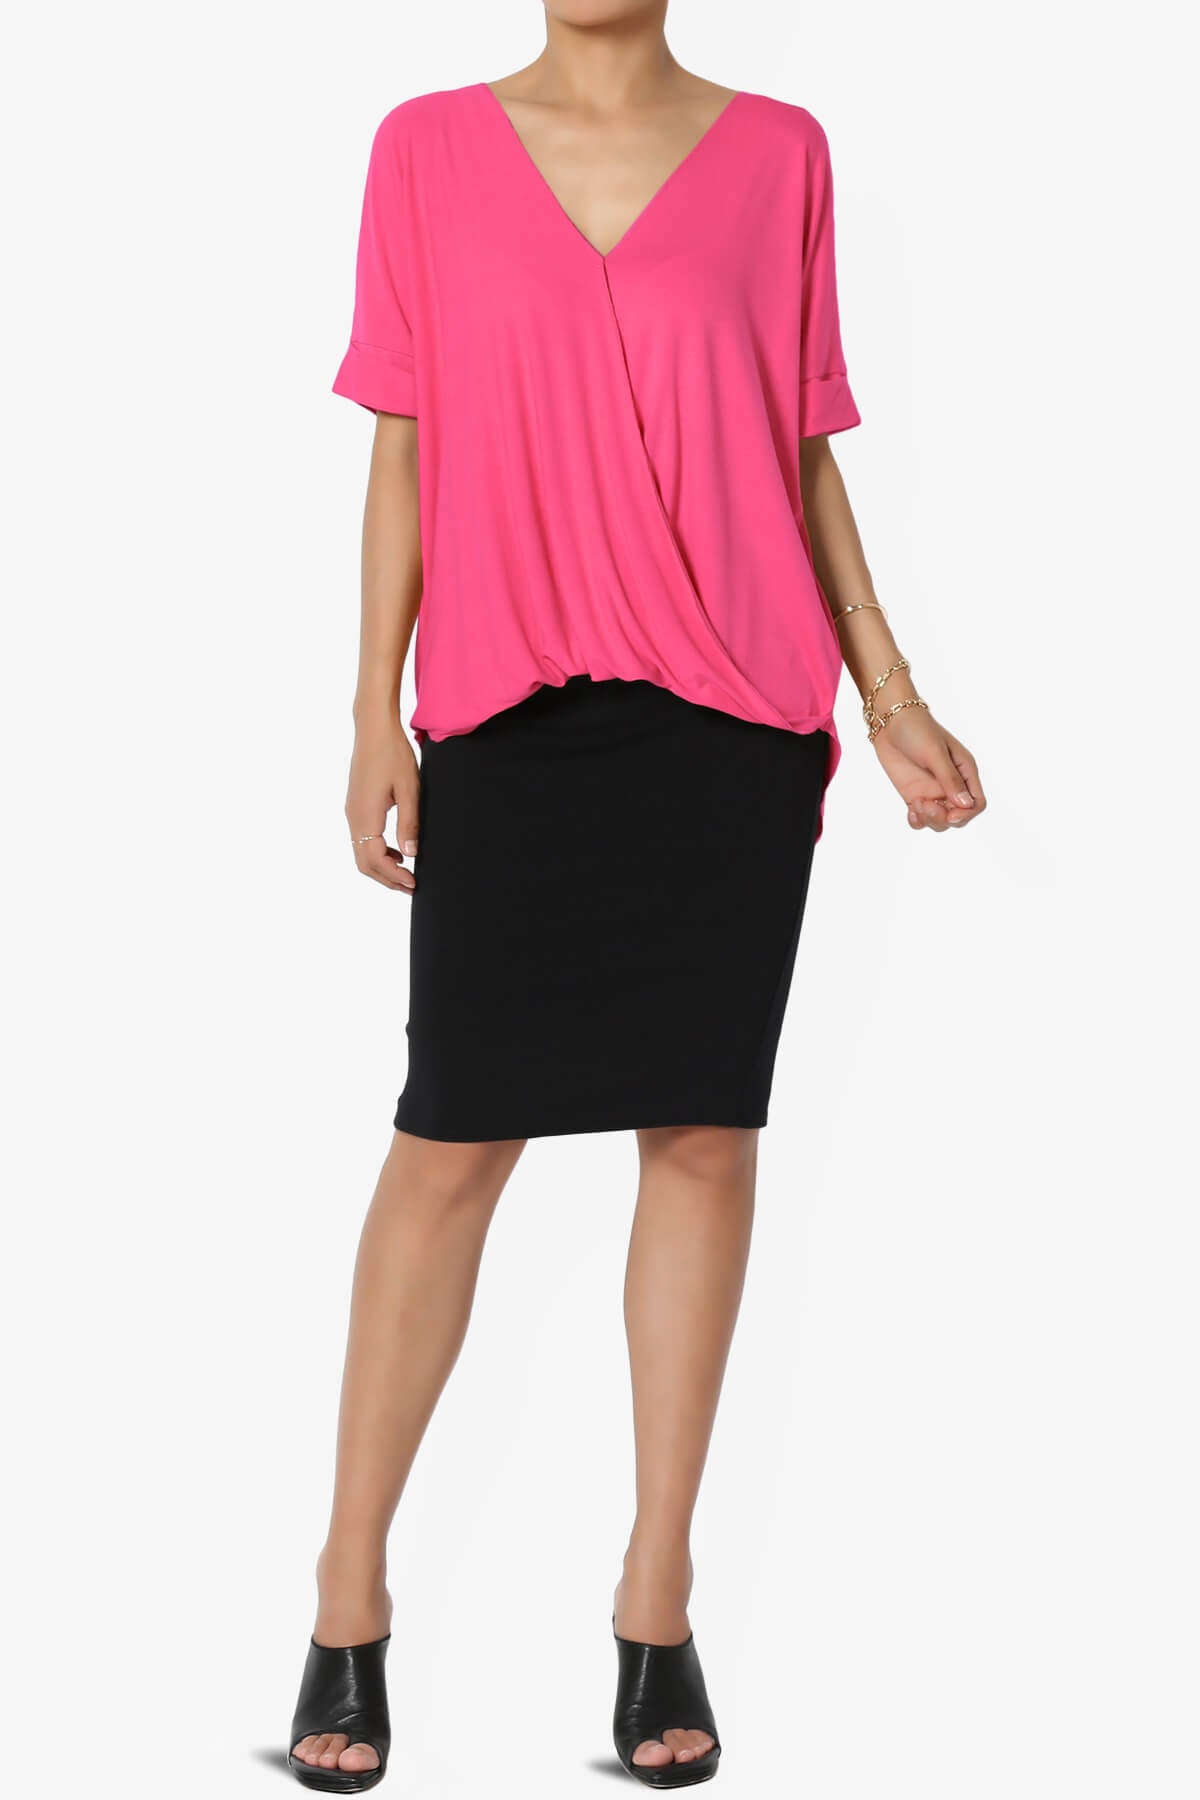 Load image into Gallery viewer, Tackle Wrap Hi-Low Crepe Knit Top FUCHSIA_6
